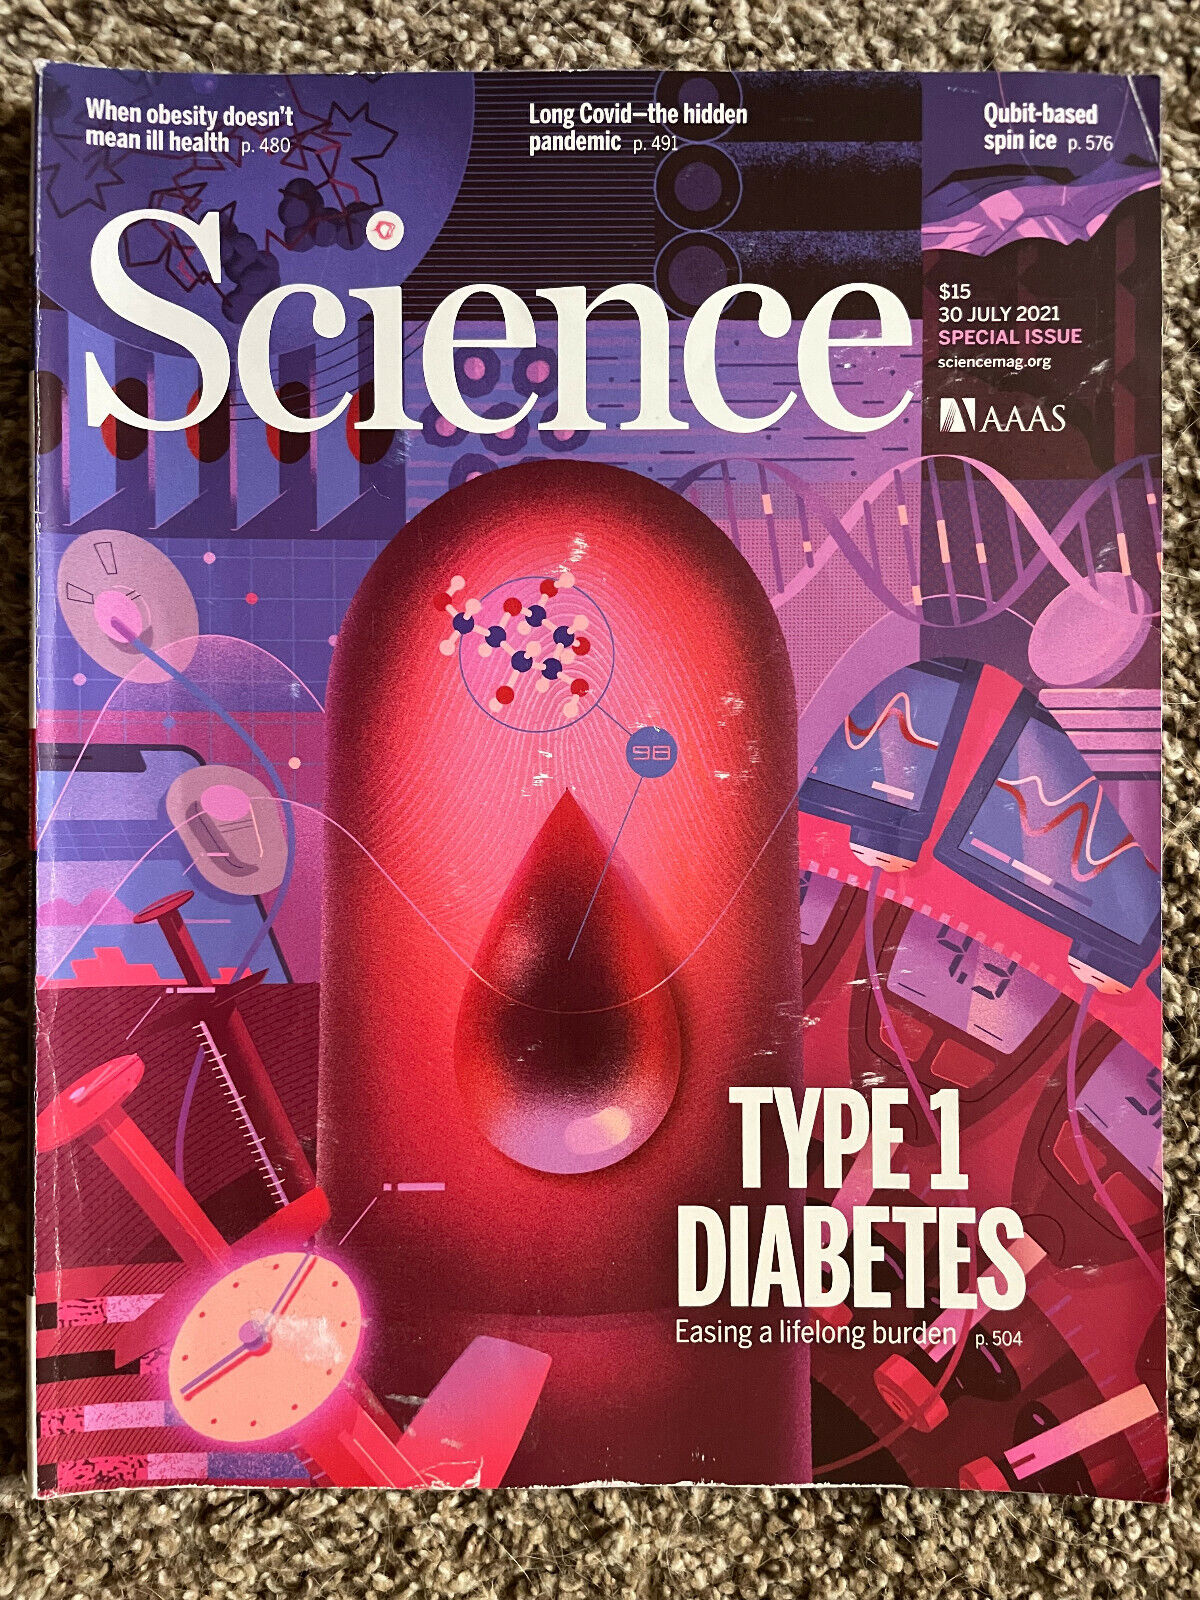 SCIENCE Magazine July 30 2021 Type 1 Diabetes Obesity Special Issue